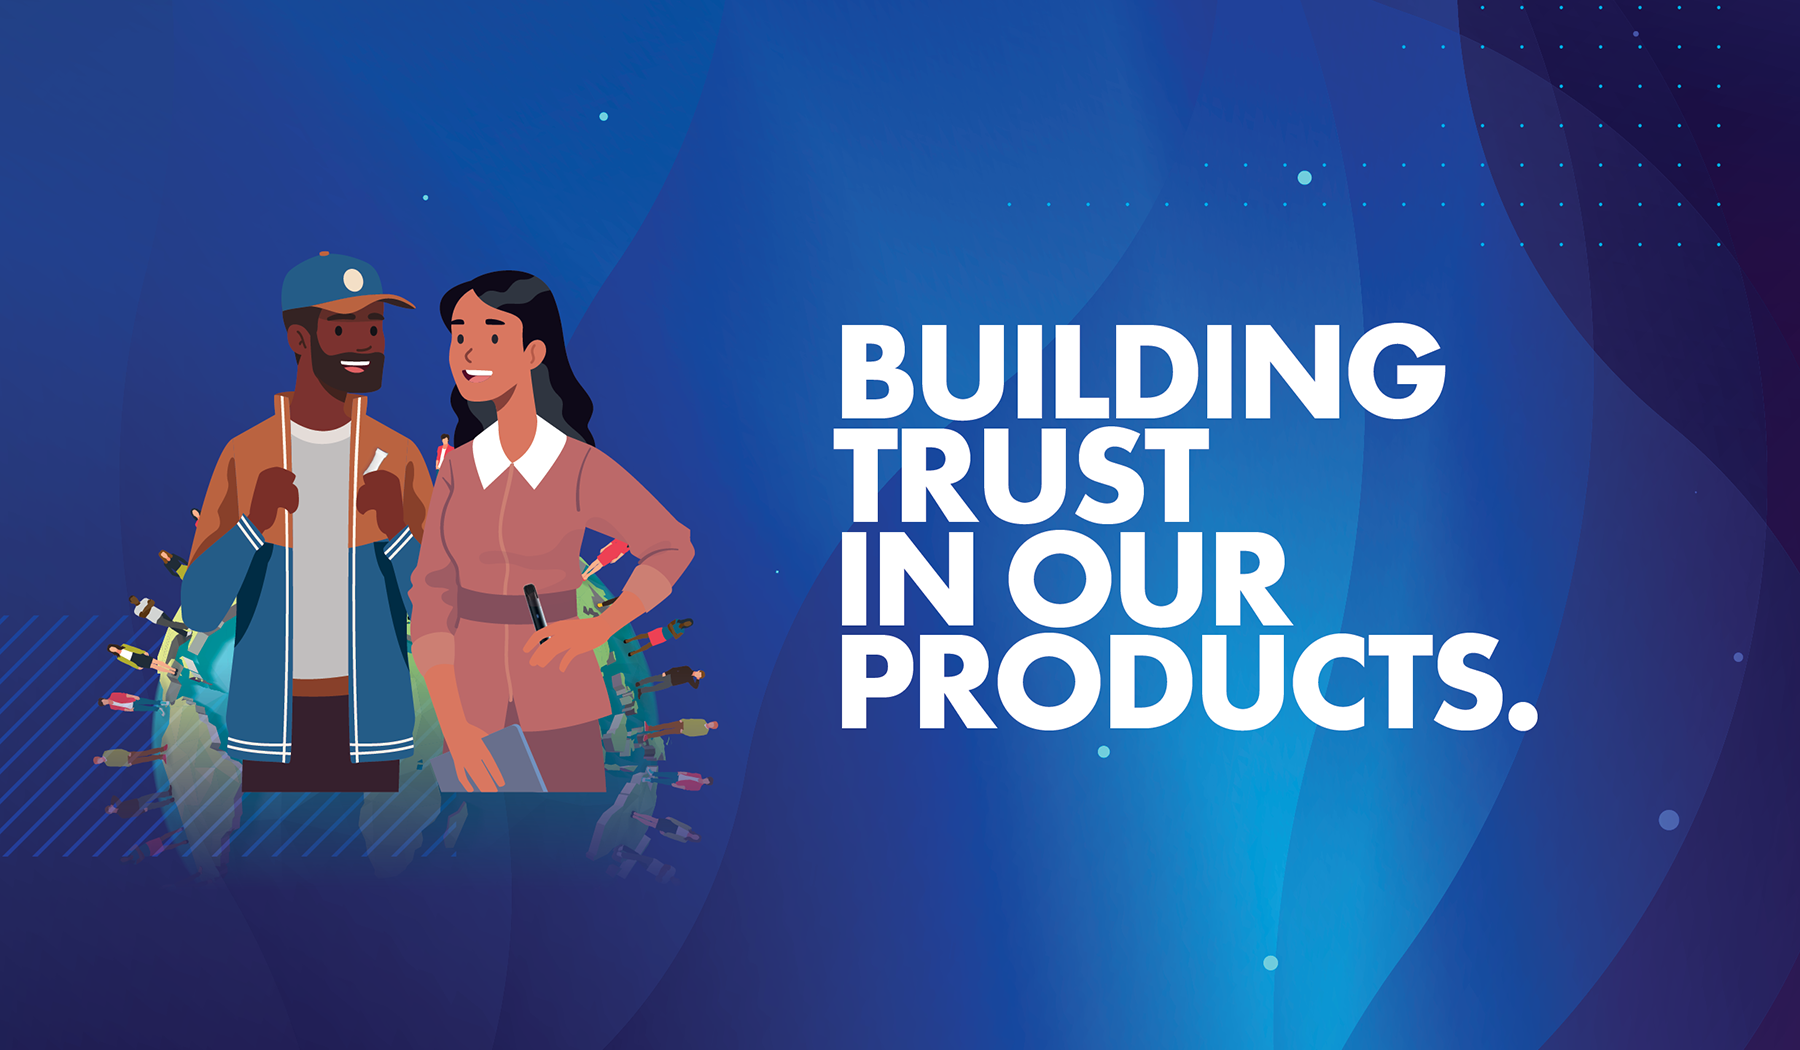 Building trust in our next generation products